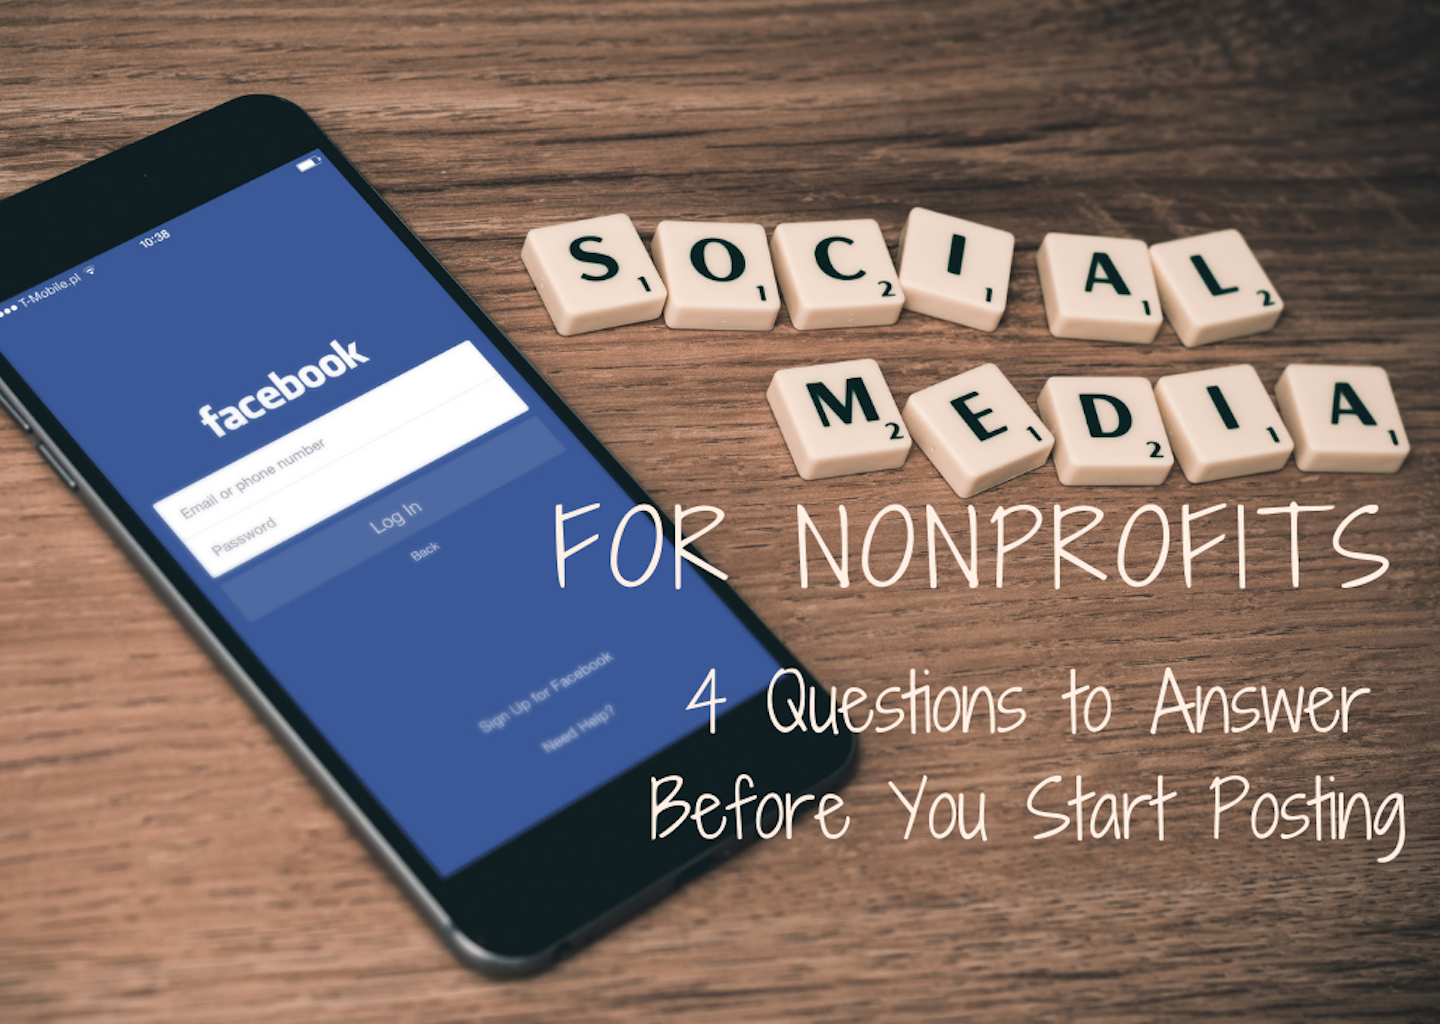 Social Media for Nonprofits: 4 Questions to Answer Before You Start Posting